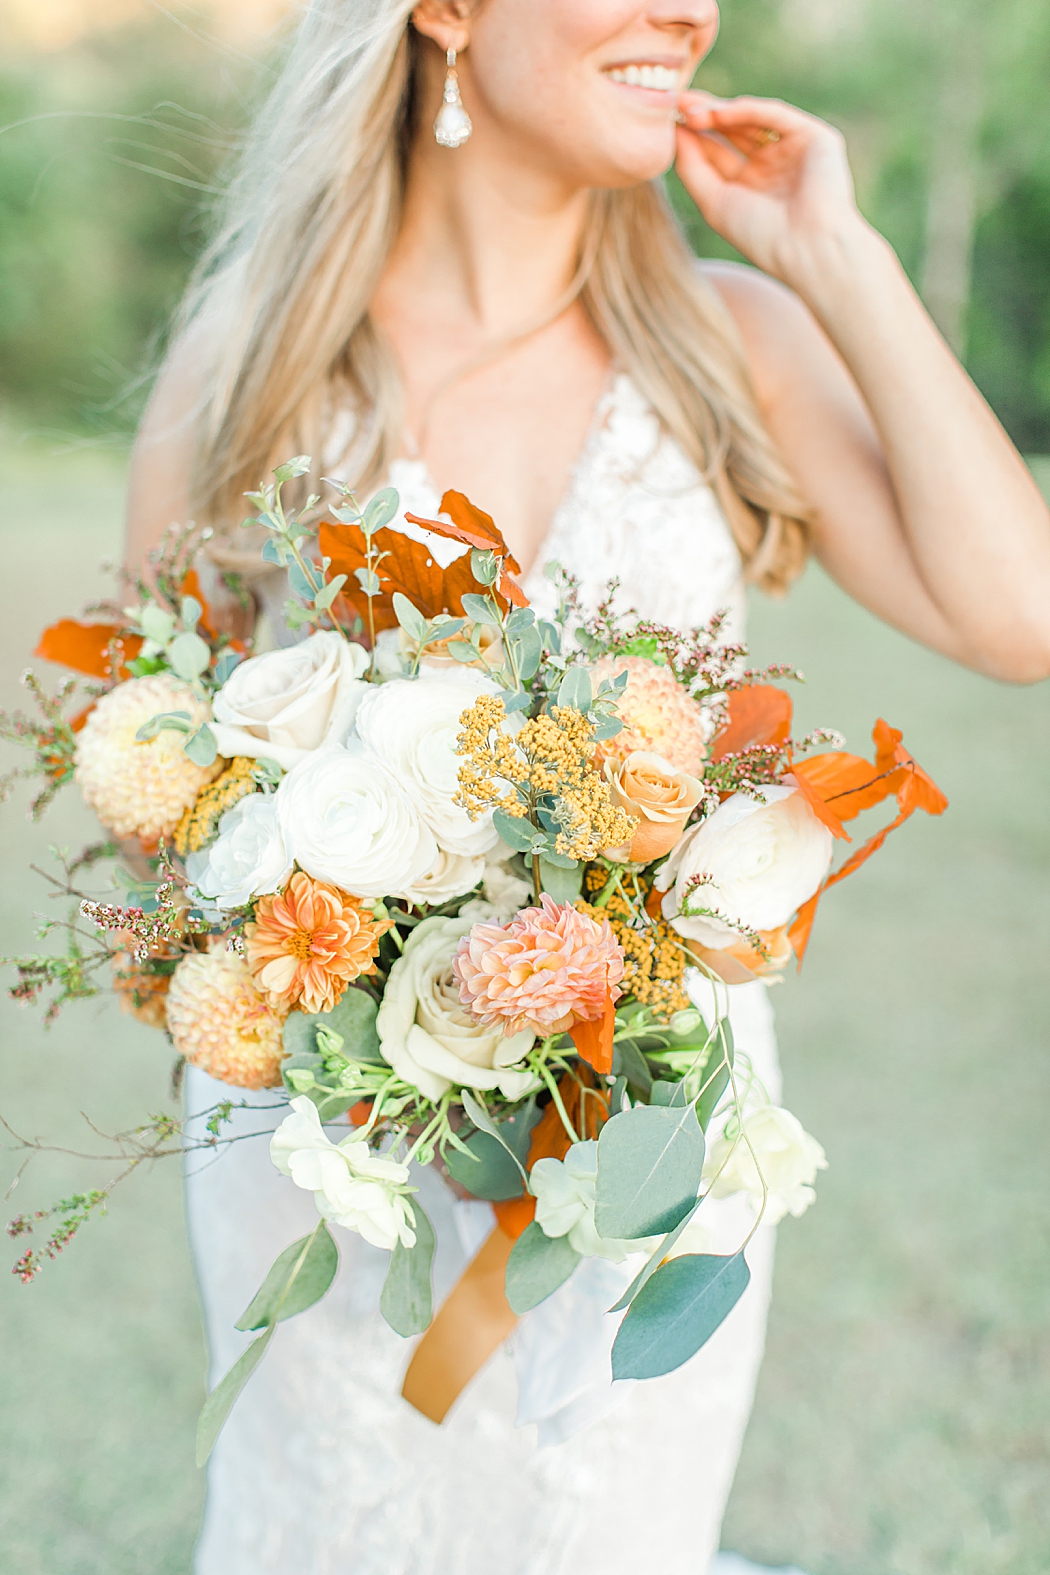 Terra Cotta Fall Micro Wedding in Kerrville Texas at a private estate in the Hill Country by Allison Jeffers Photography 0084